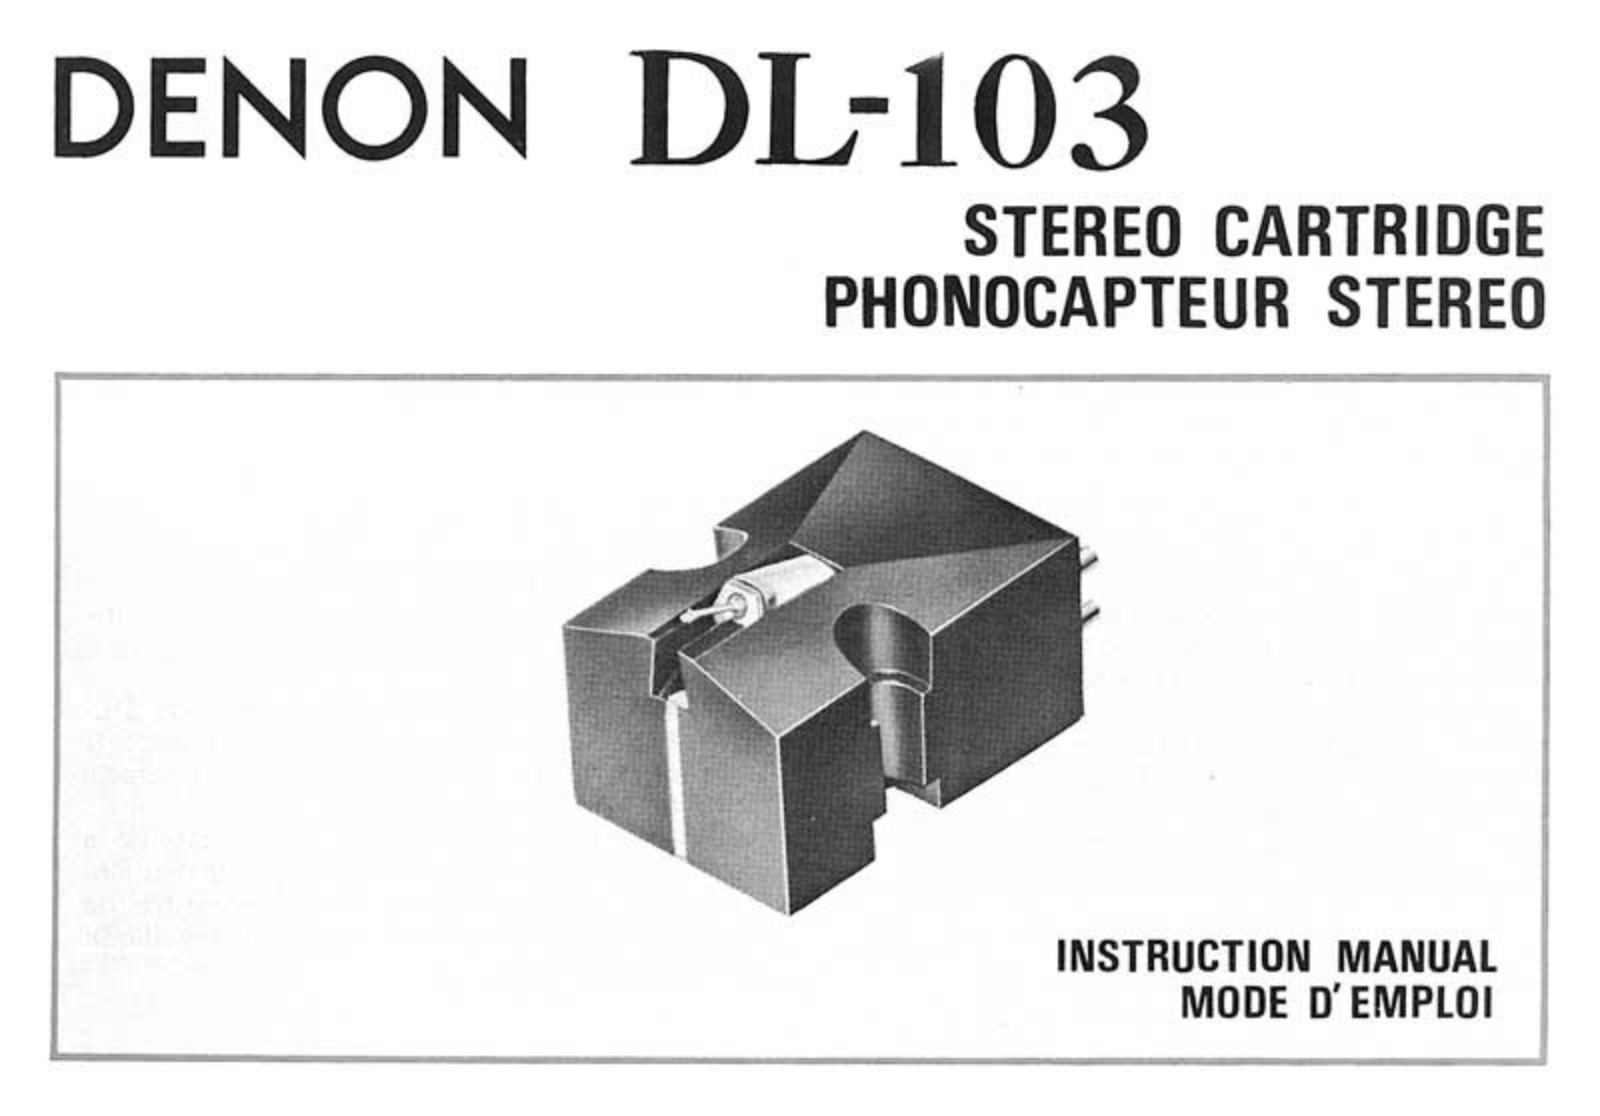 Denon DL-103 Owners Manual